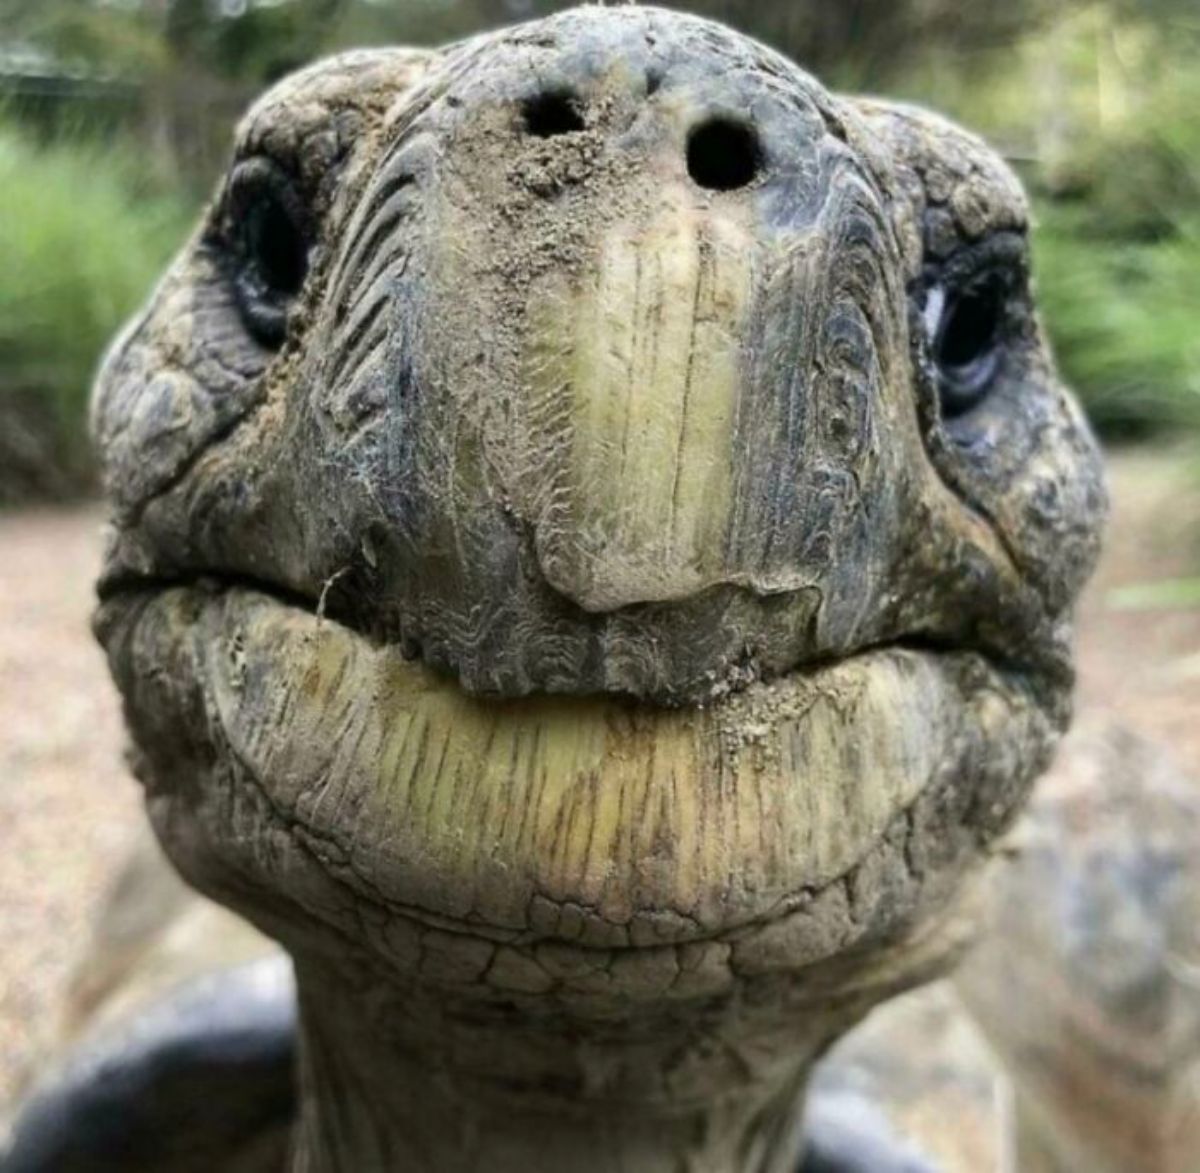 close up of a turtle's face